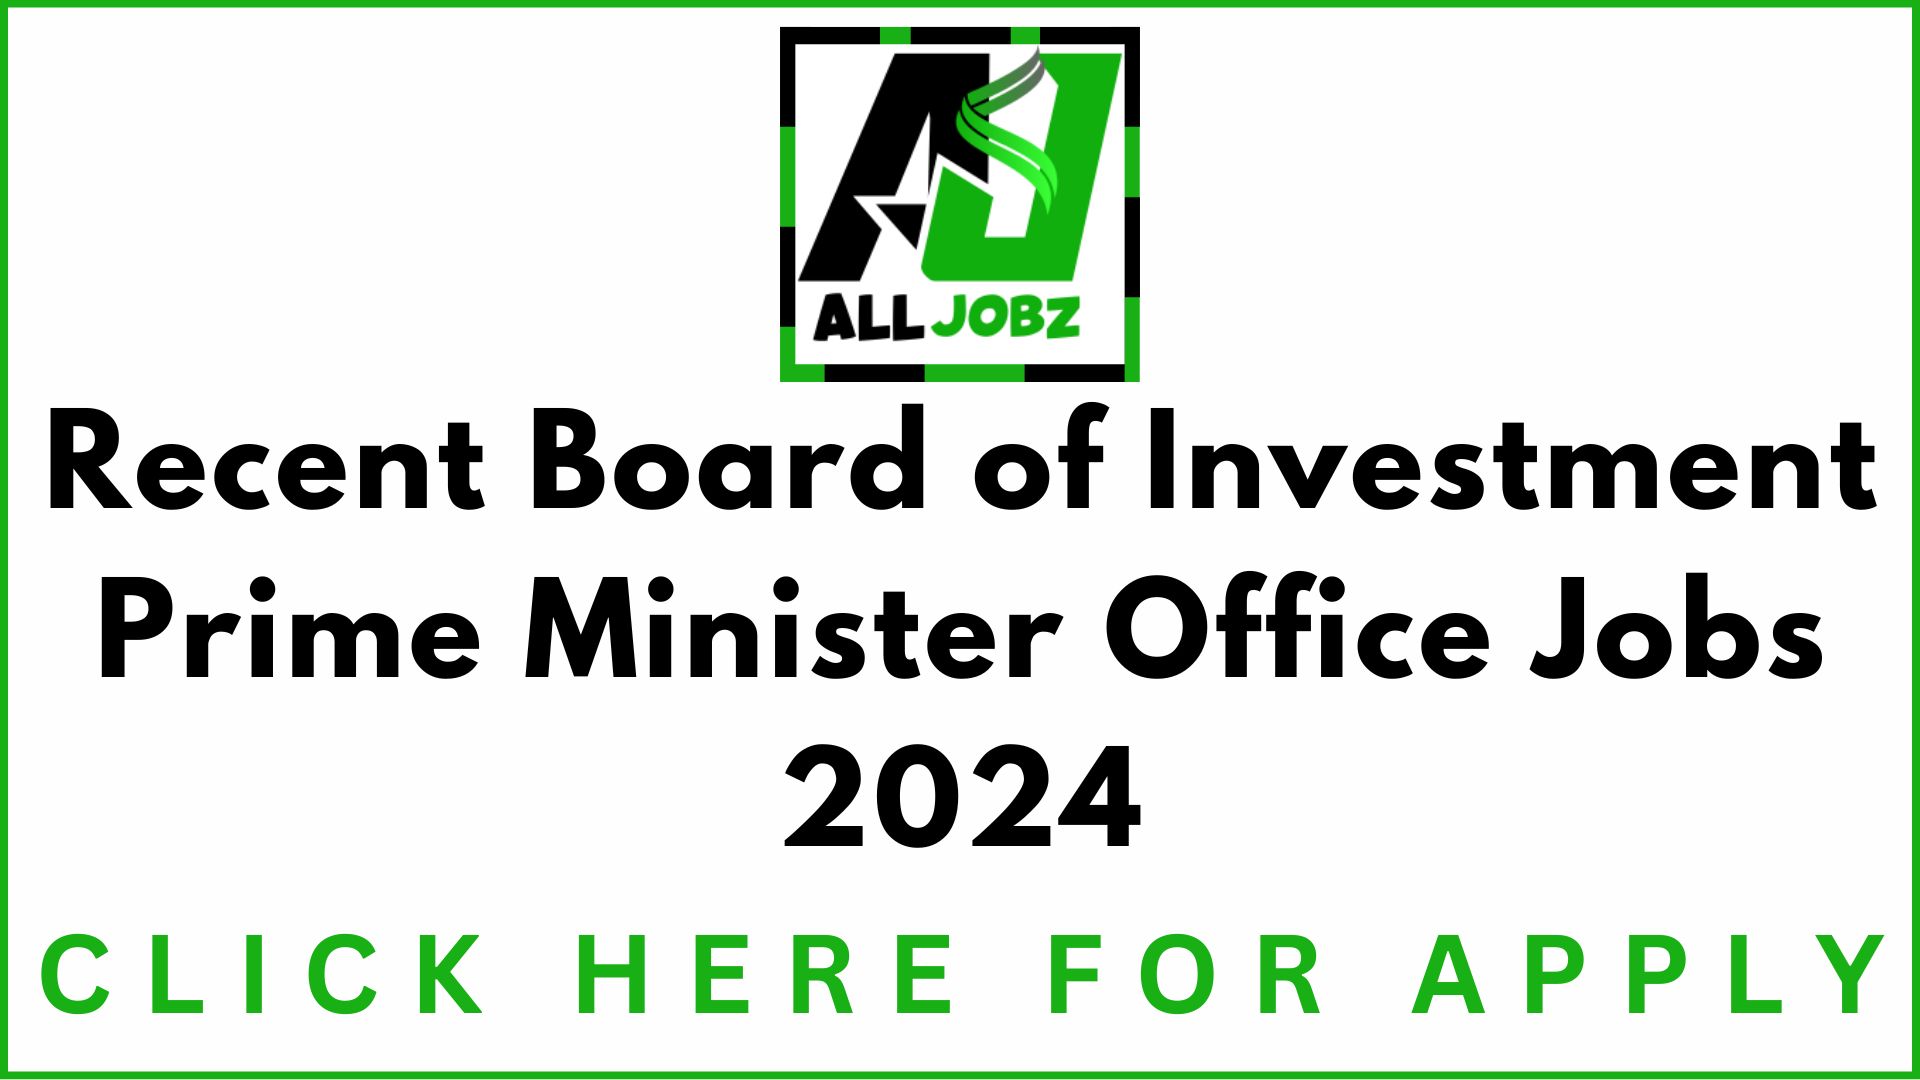 Recent Board Of Investment Prime Minister Office Management Jobs 2024, Recent Board Of Investment Job Opportunities Announced, Board Of Investment Jobs In Islamabad, Board Of Investment Jobs Online Apply, Board Of Investment Jobs Salary, Board Of Investment Jobs In Pakistan, Board Of Investment Jobs Islamabad, Prime Minister Office Jobs 2024, Prime Minister Office Jobs 2024 Online Apply, Prime Minister Office Jobs 2024 Islamabad, Pmo Jobs Online Apply, Prime Minister Office Contact Number, Pmo Taxila Jobs,